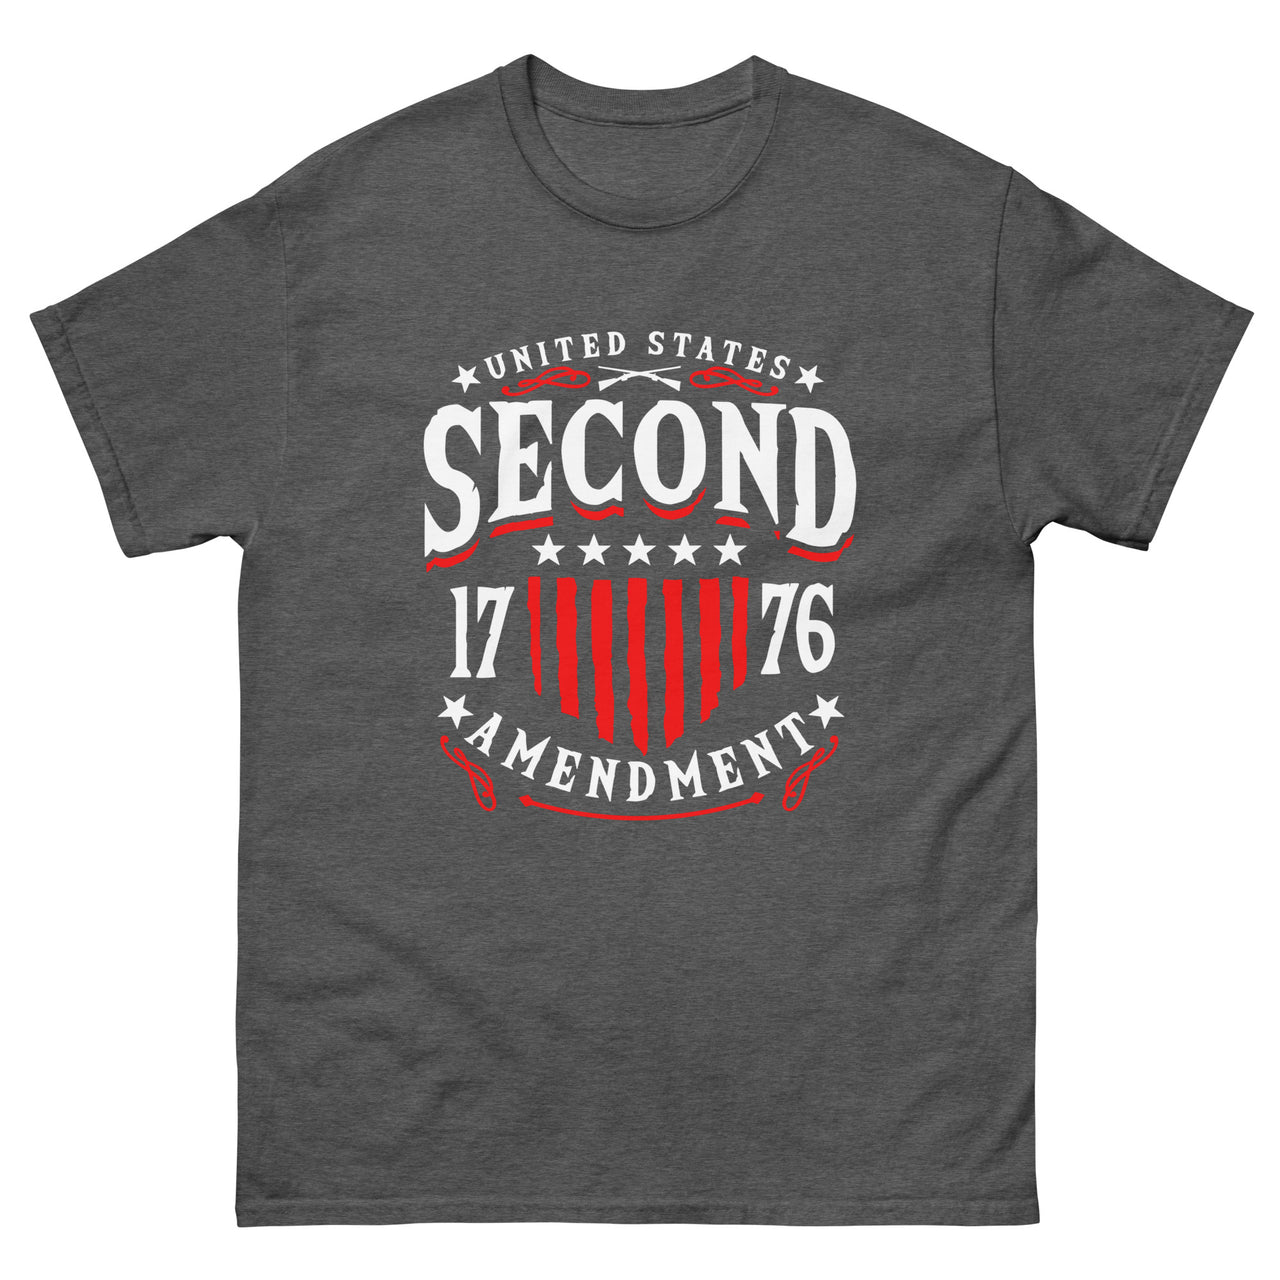 United States Second Amendment 1776 Men's classic tee Image On Front Men's classic tee